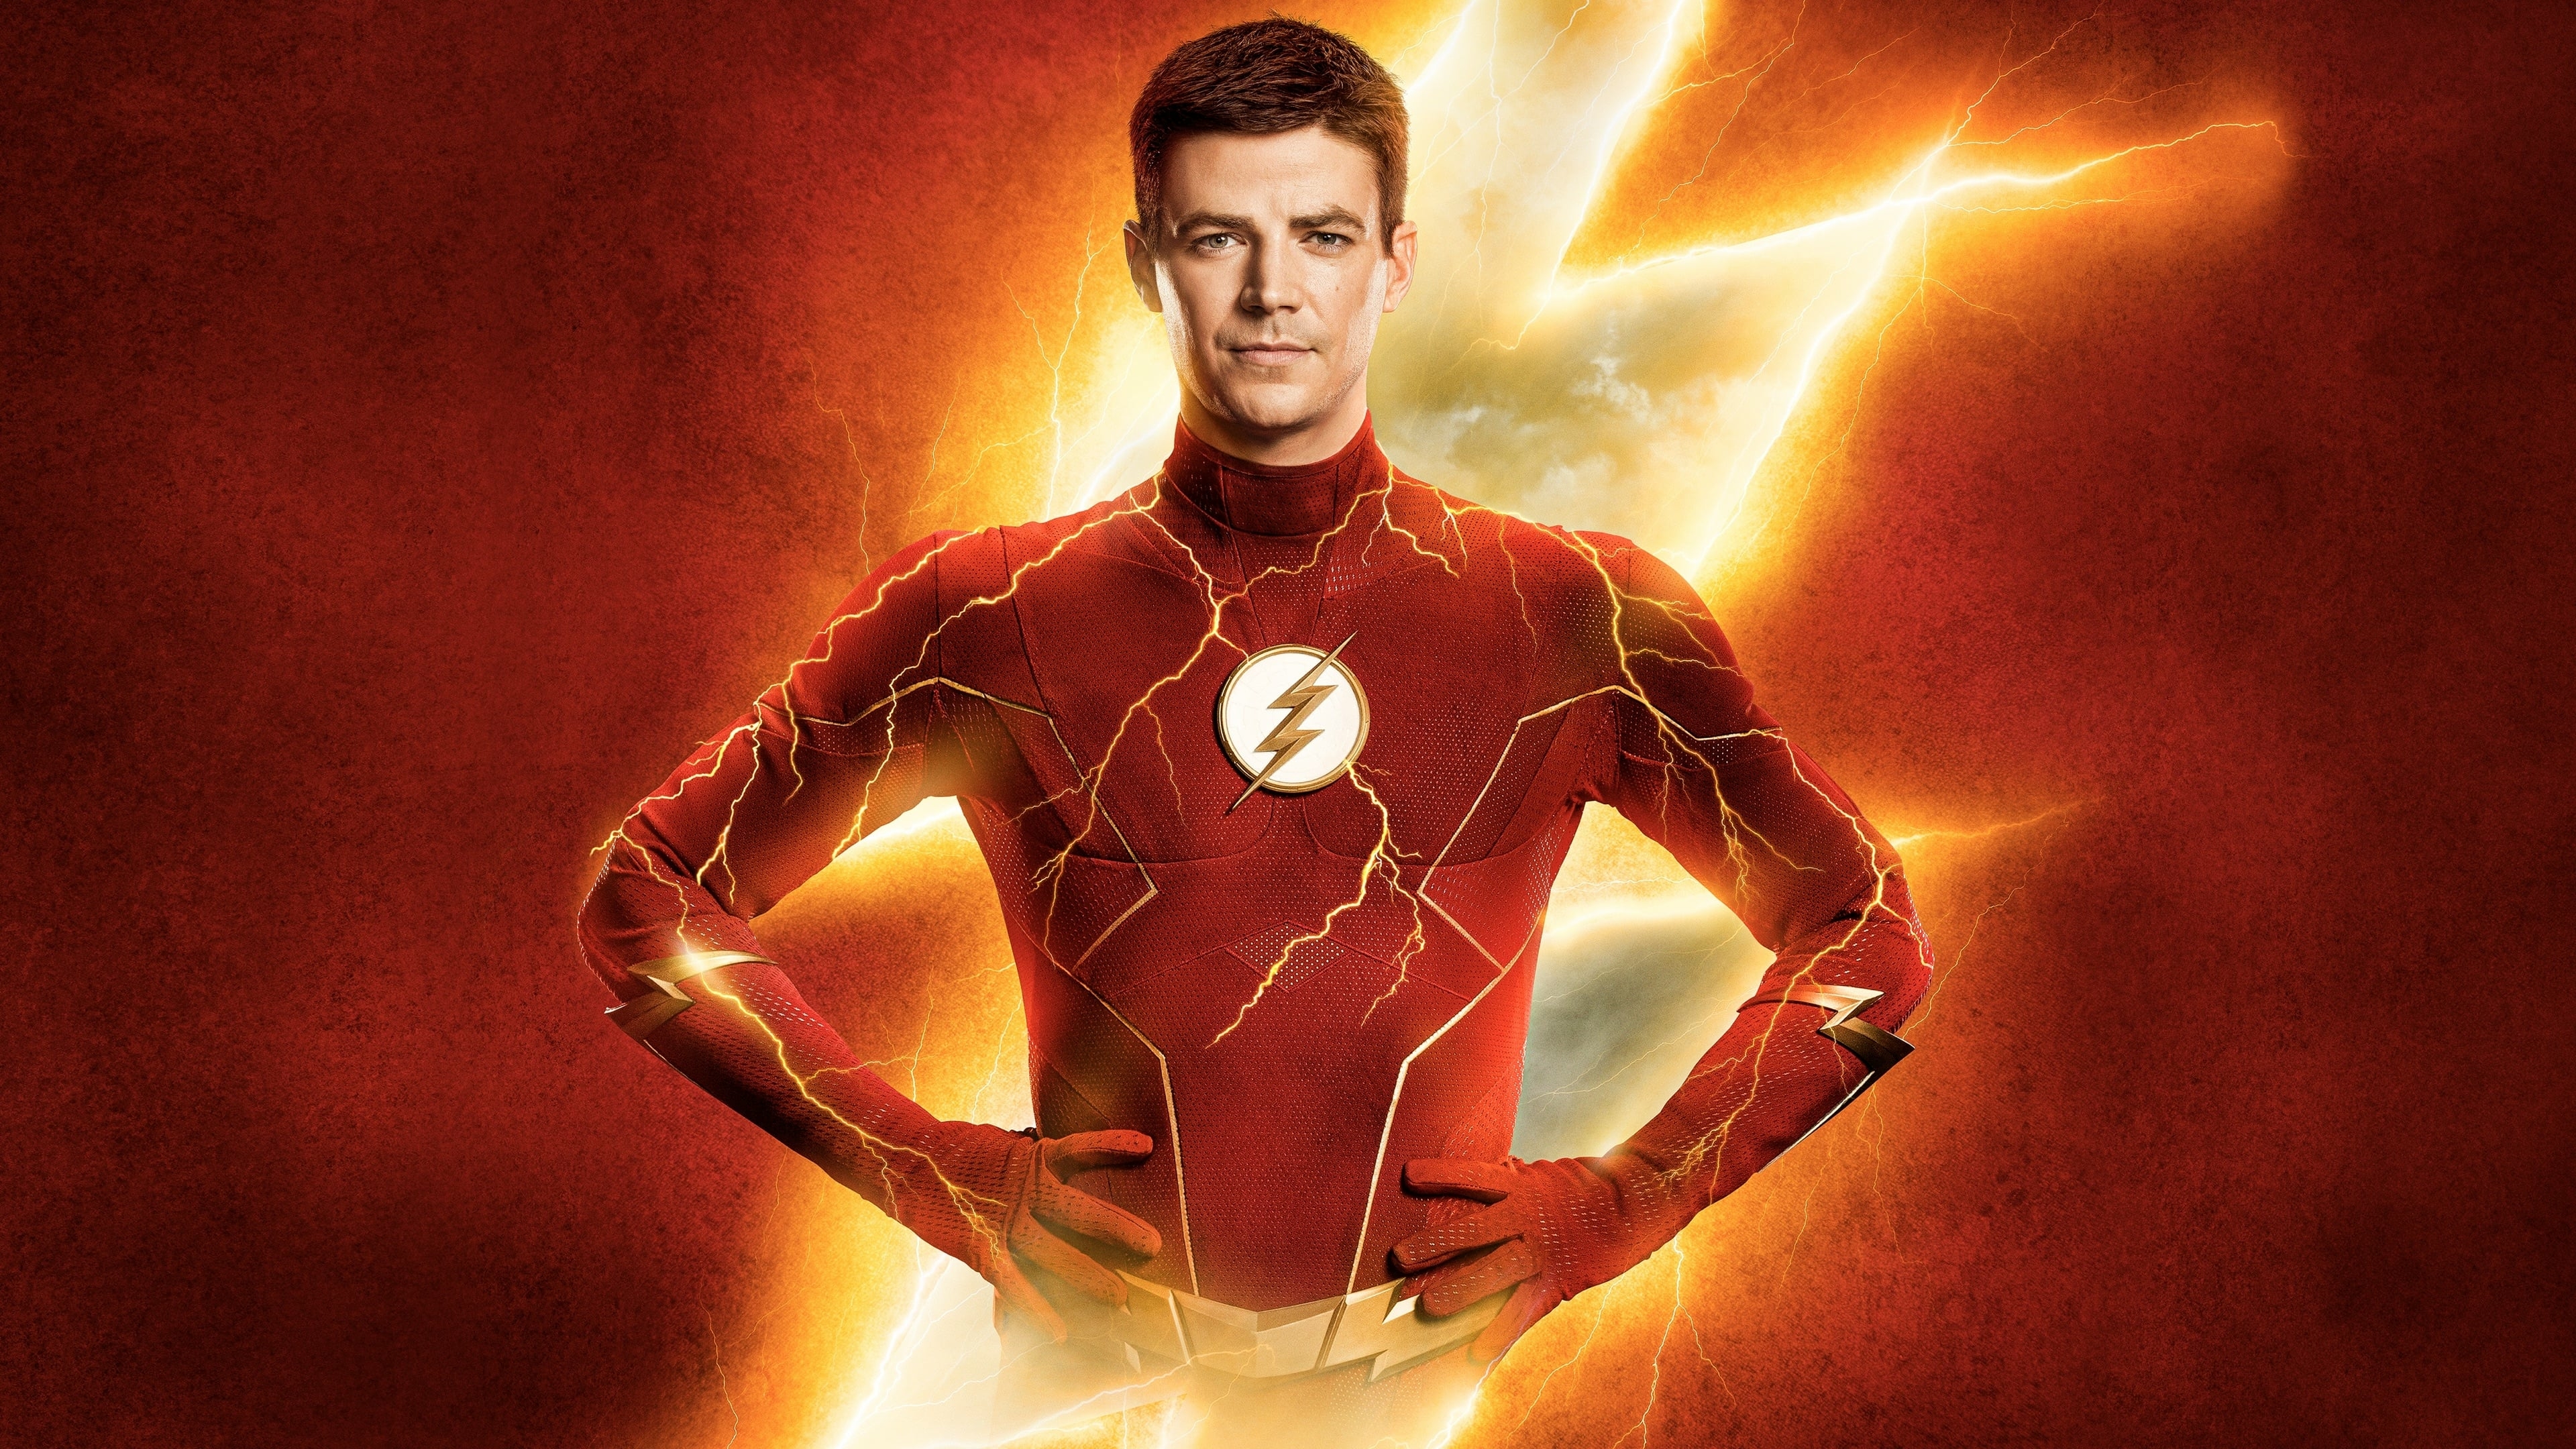 1440x25602021911 The Flash 2022 1440x25602021911 Resolution Wallpaper, HD  TV Series 4K Wallpapers, Images, Photos and Background - Wallpapers Den